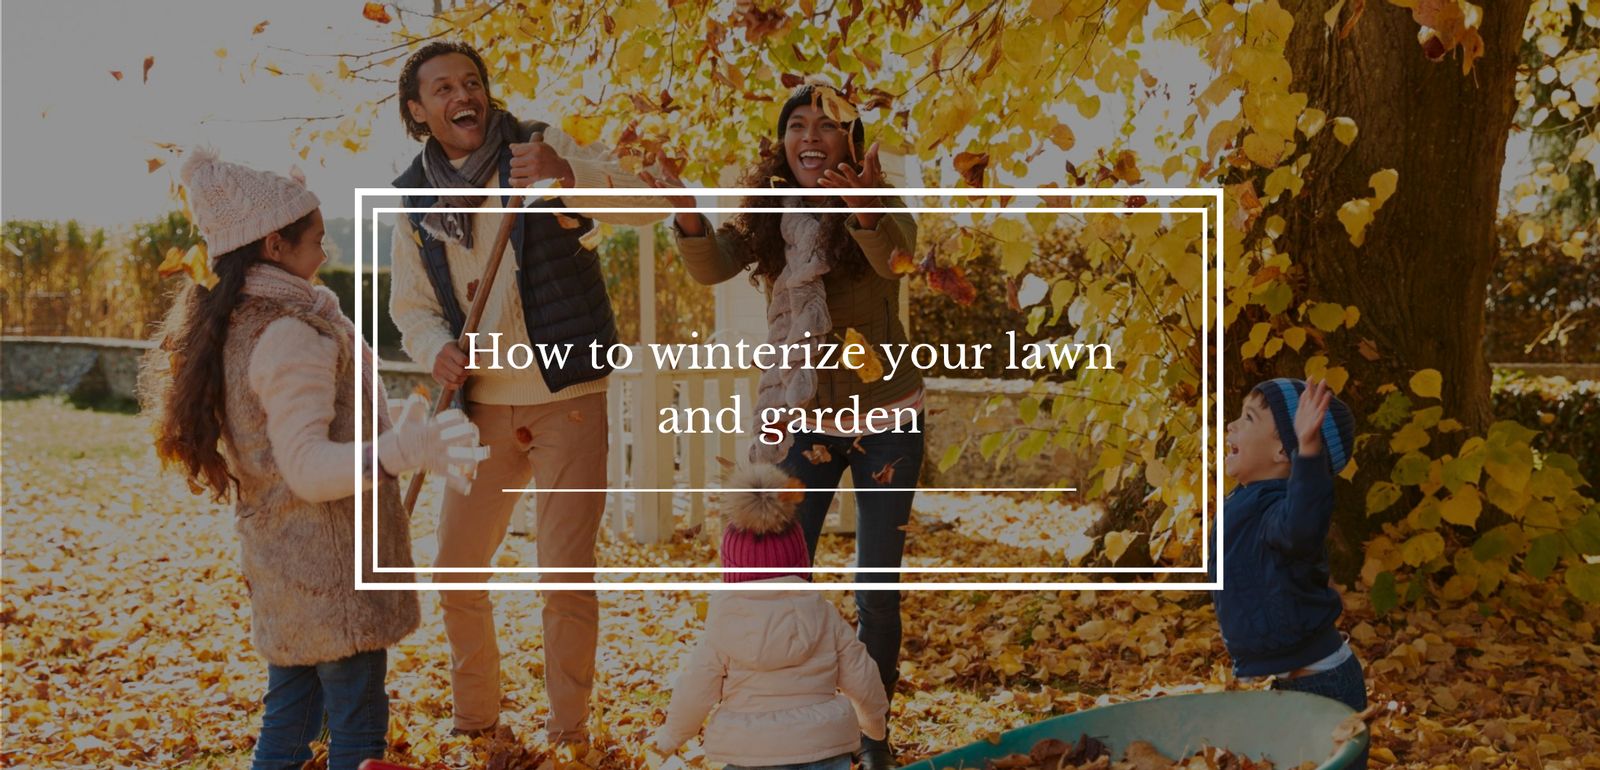 How to winterize your lawn and garden